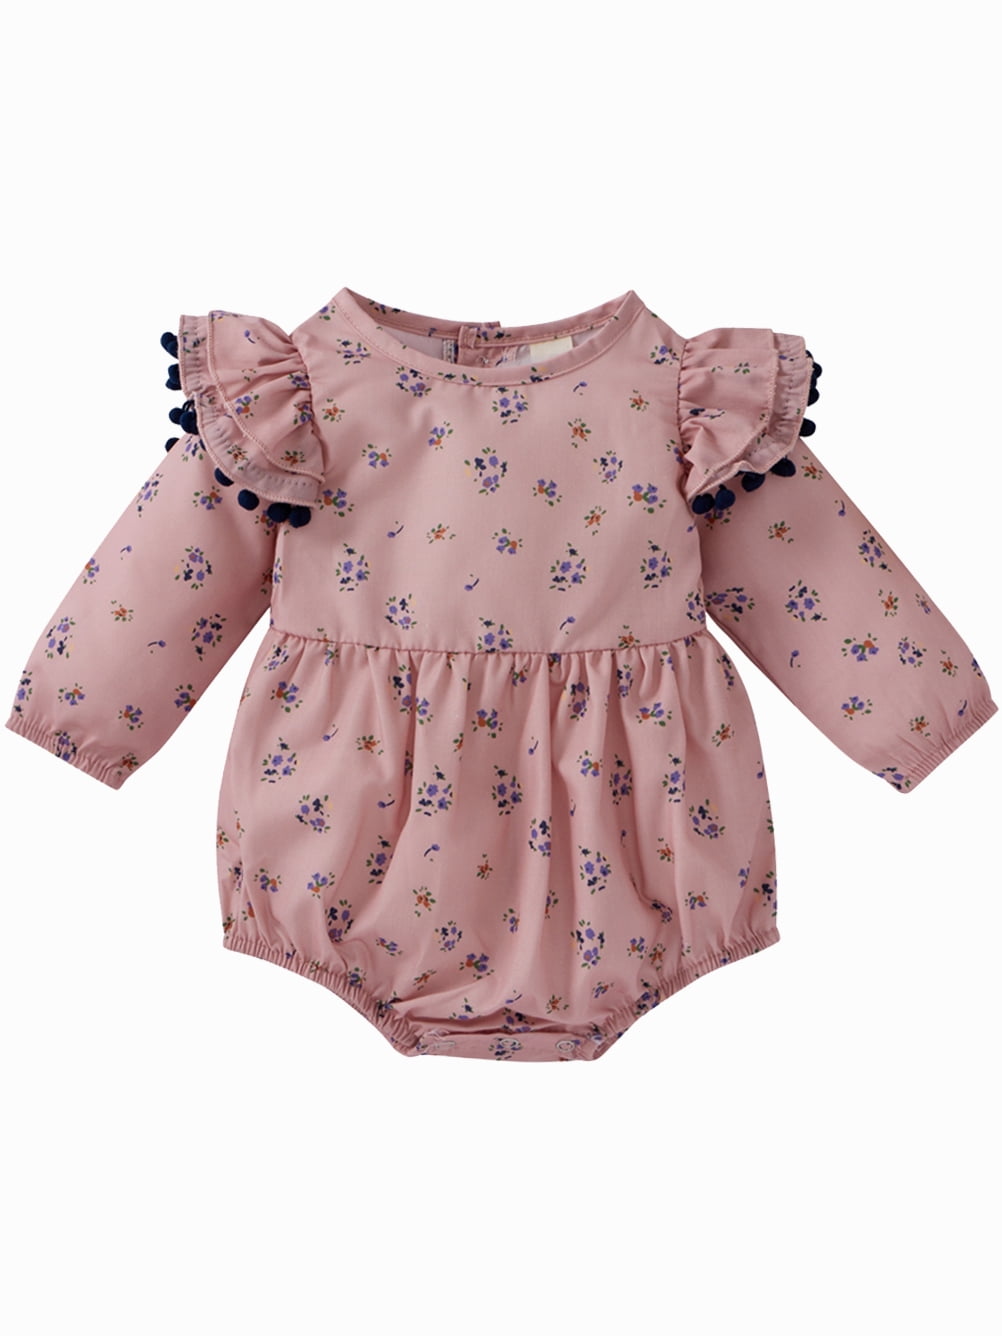 Newborn Baby Girl Flower Ruffle Romper Bodysuit Jumpsuit Outfit Clothes 0-4T 